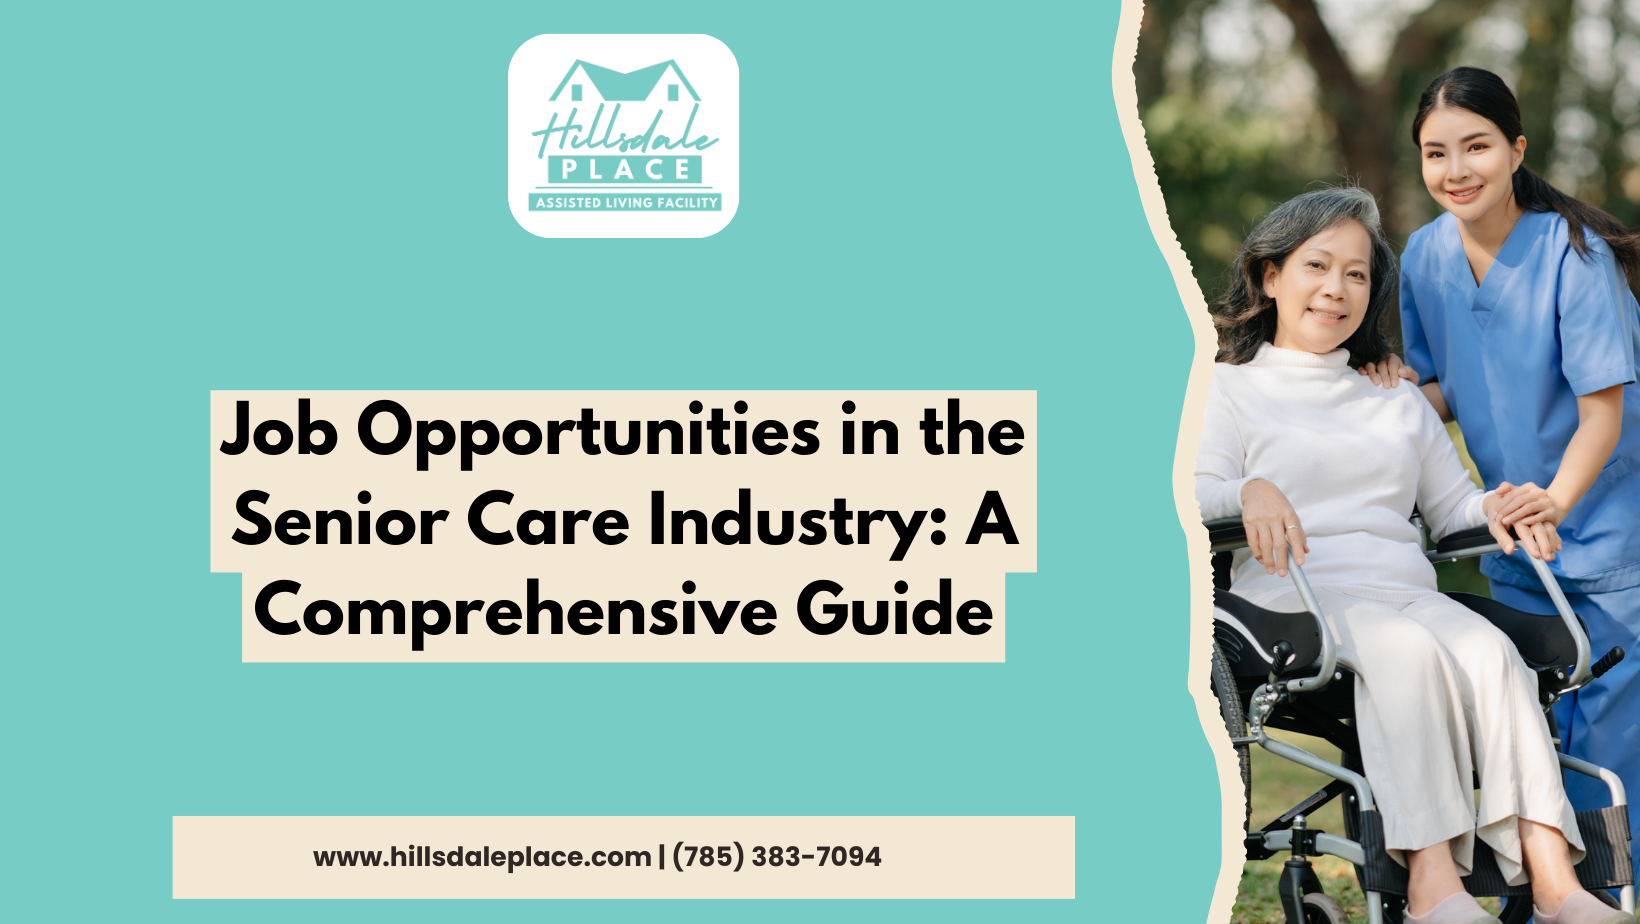 Job Opportunities in the Senior Care Industry: A Comprehensive Guide